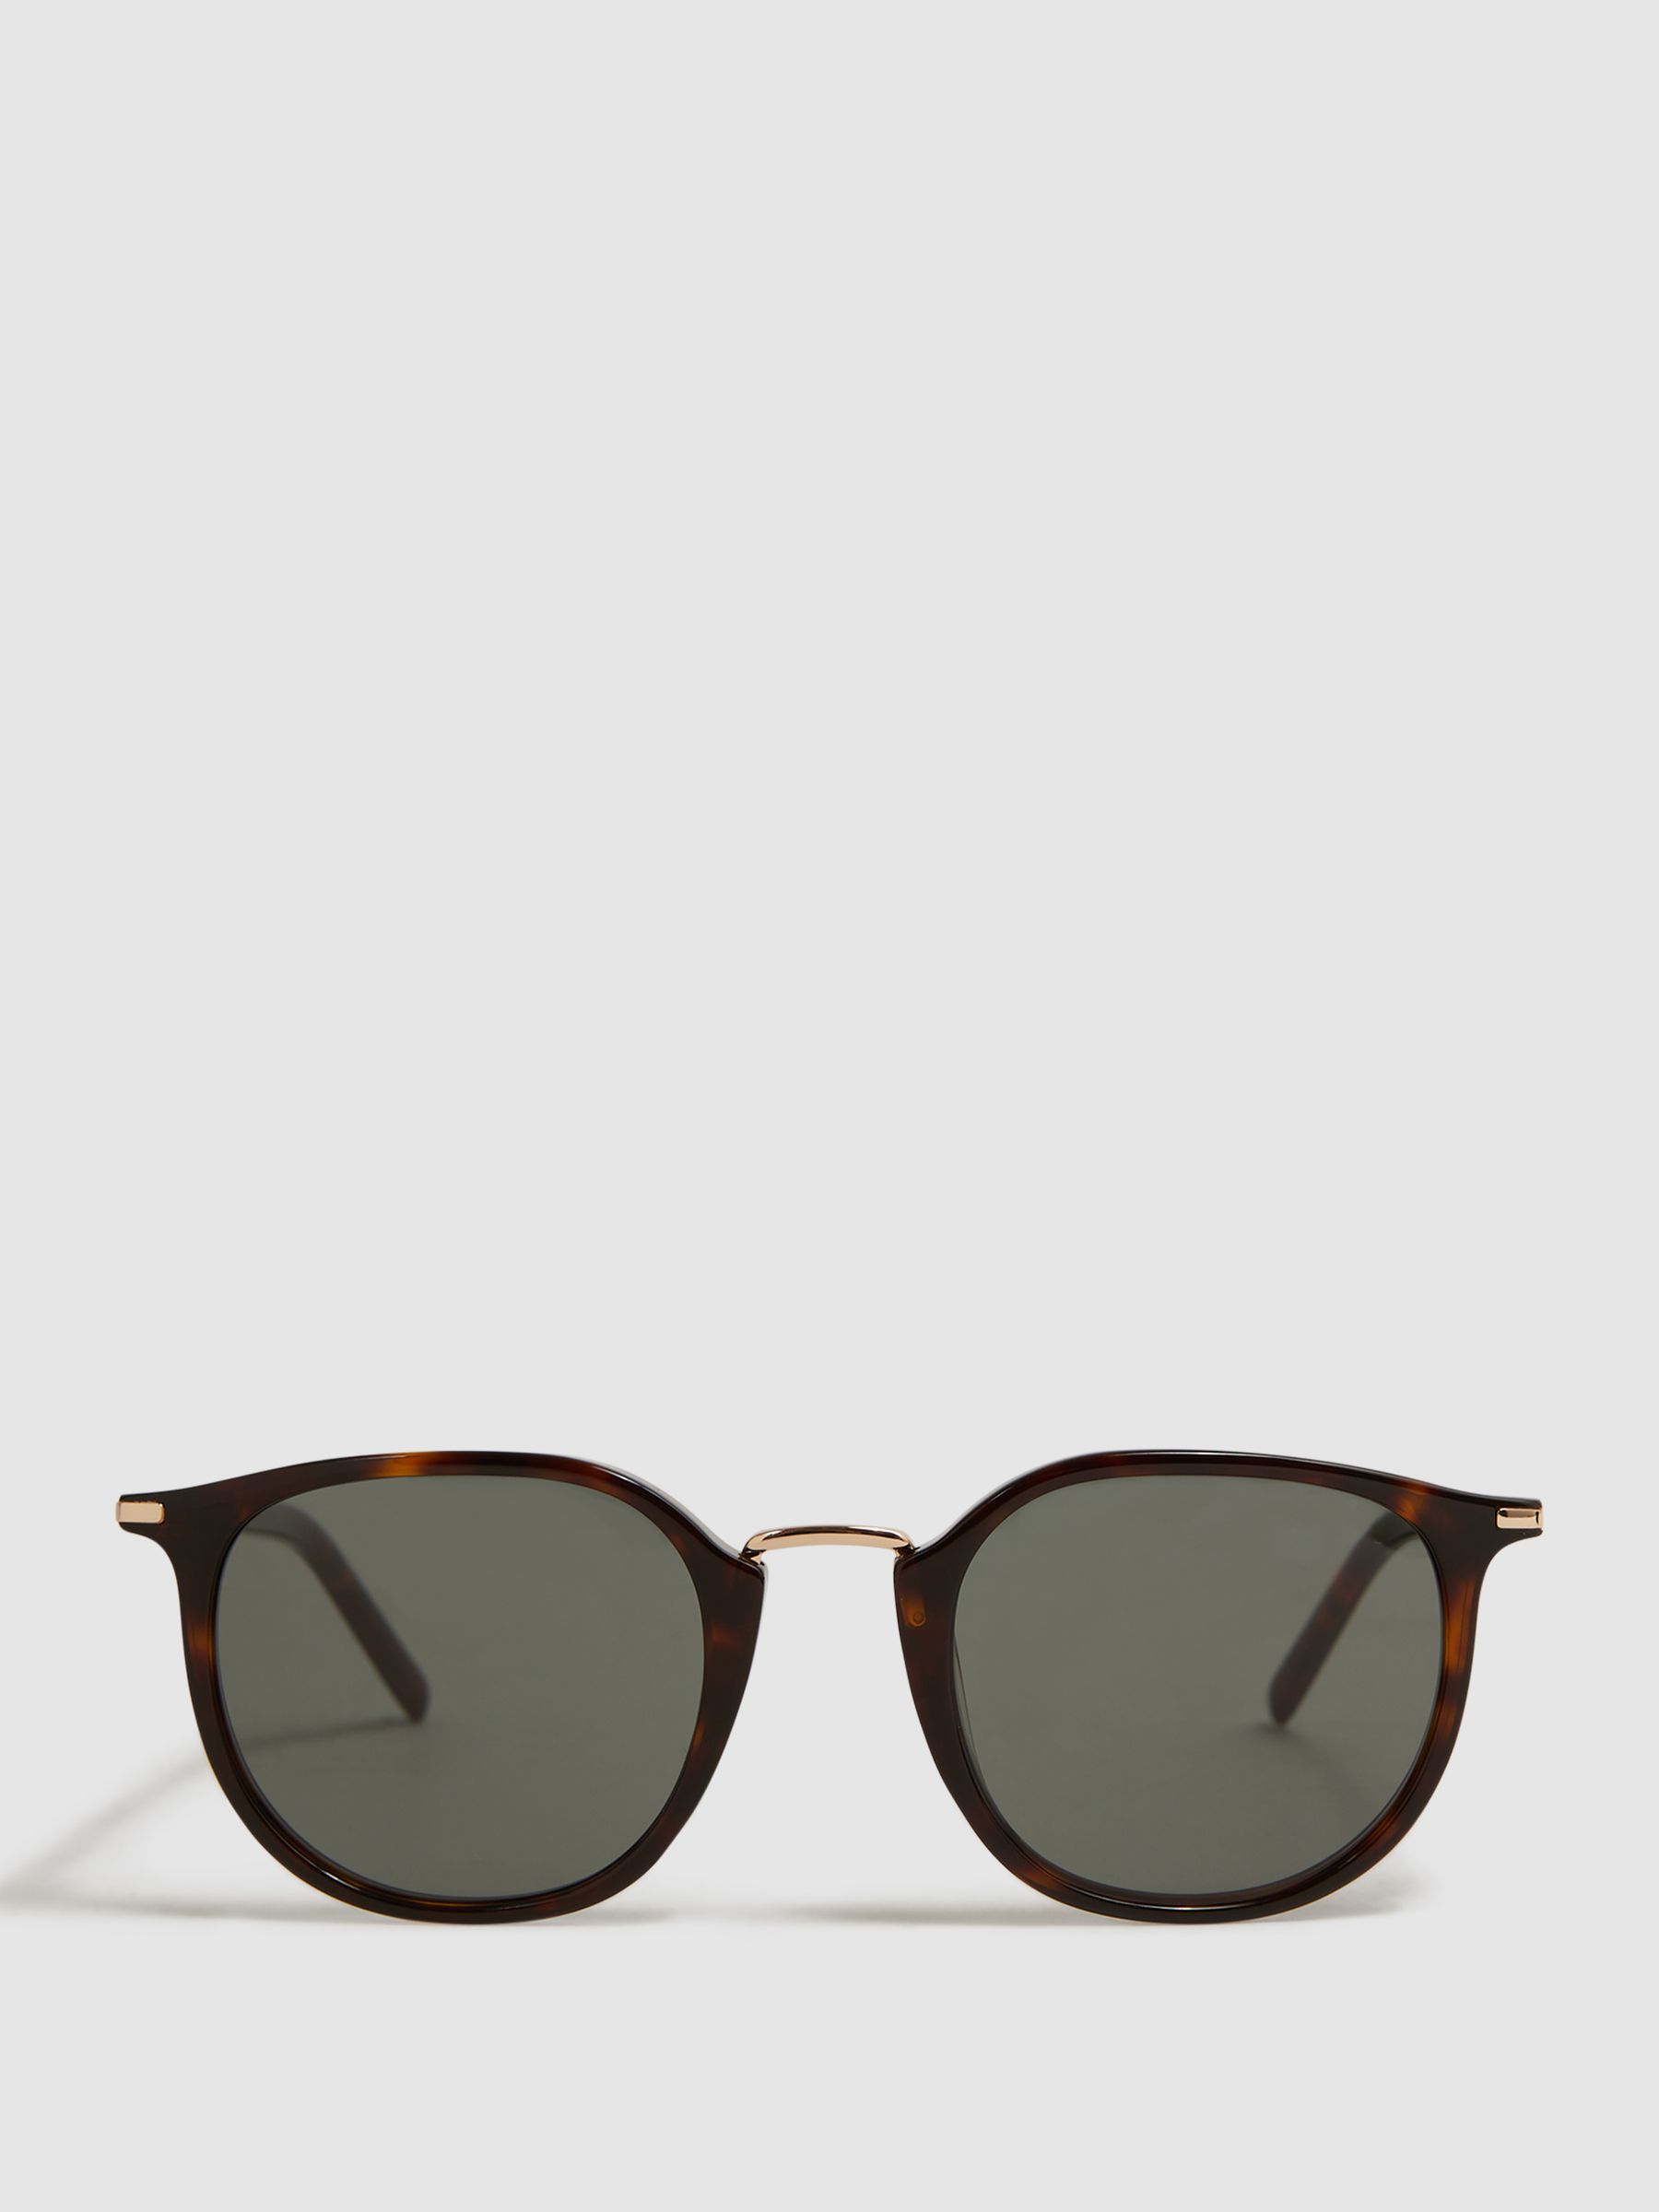 Paige Vintage Round Acetate Frame Sunglasses in Brown - REISS